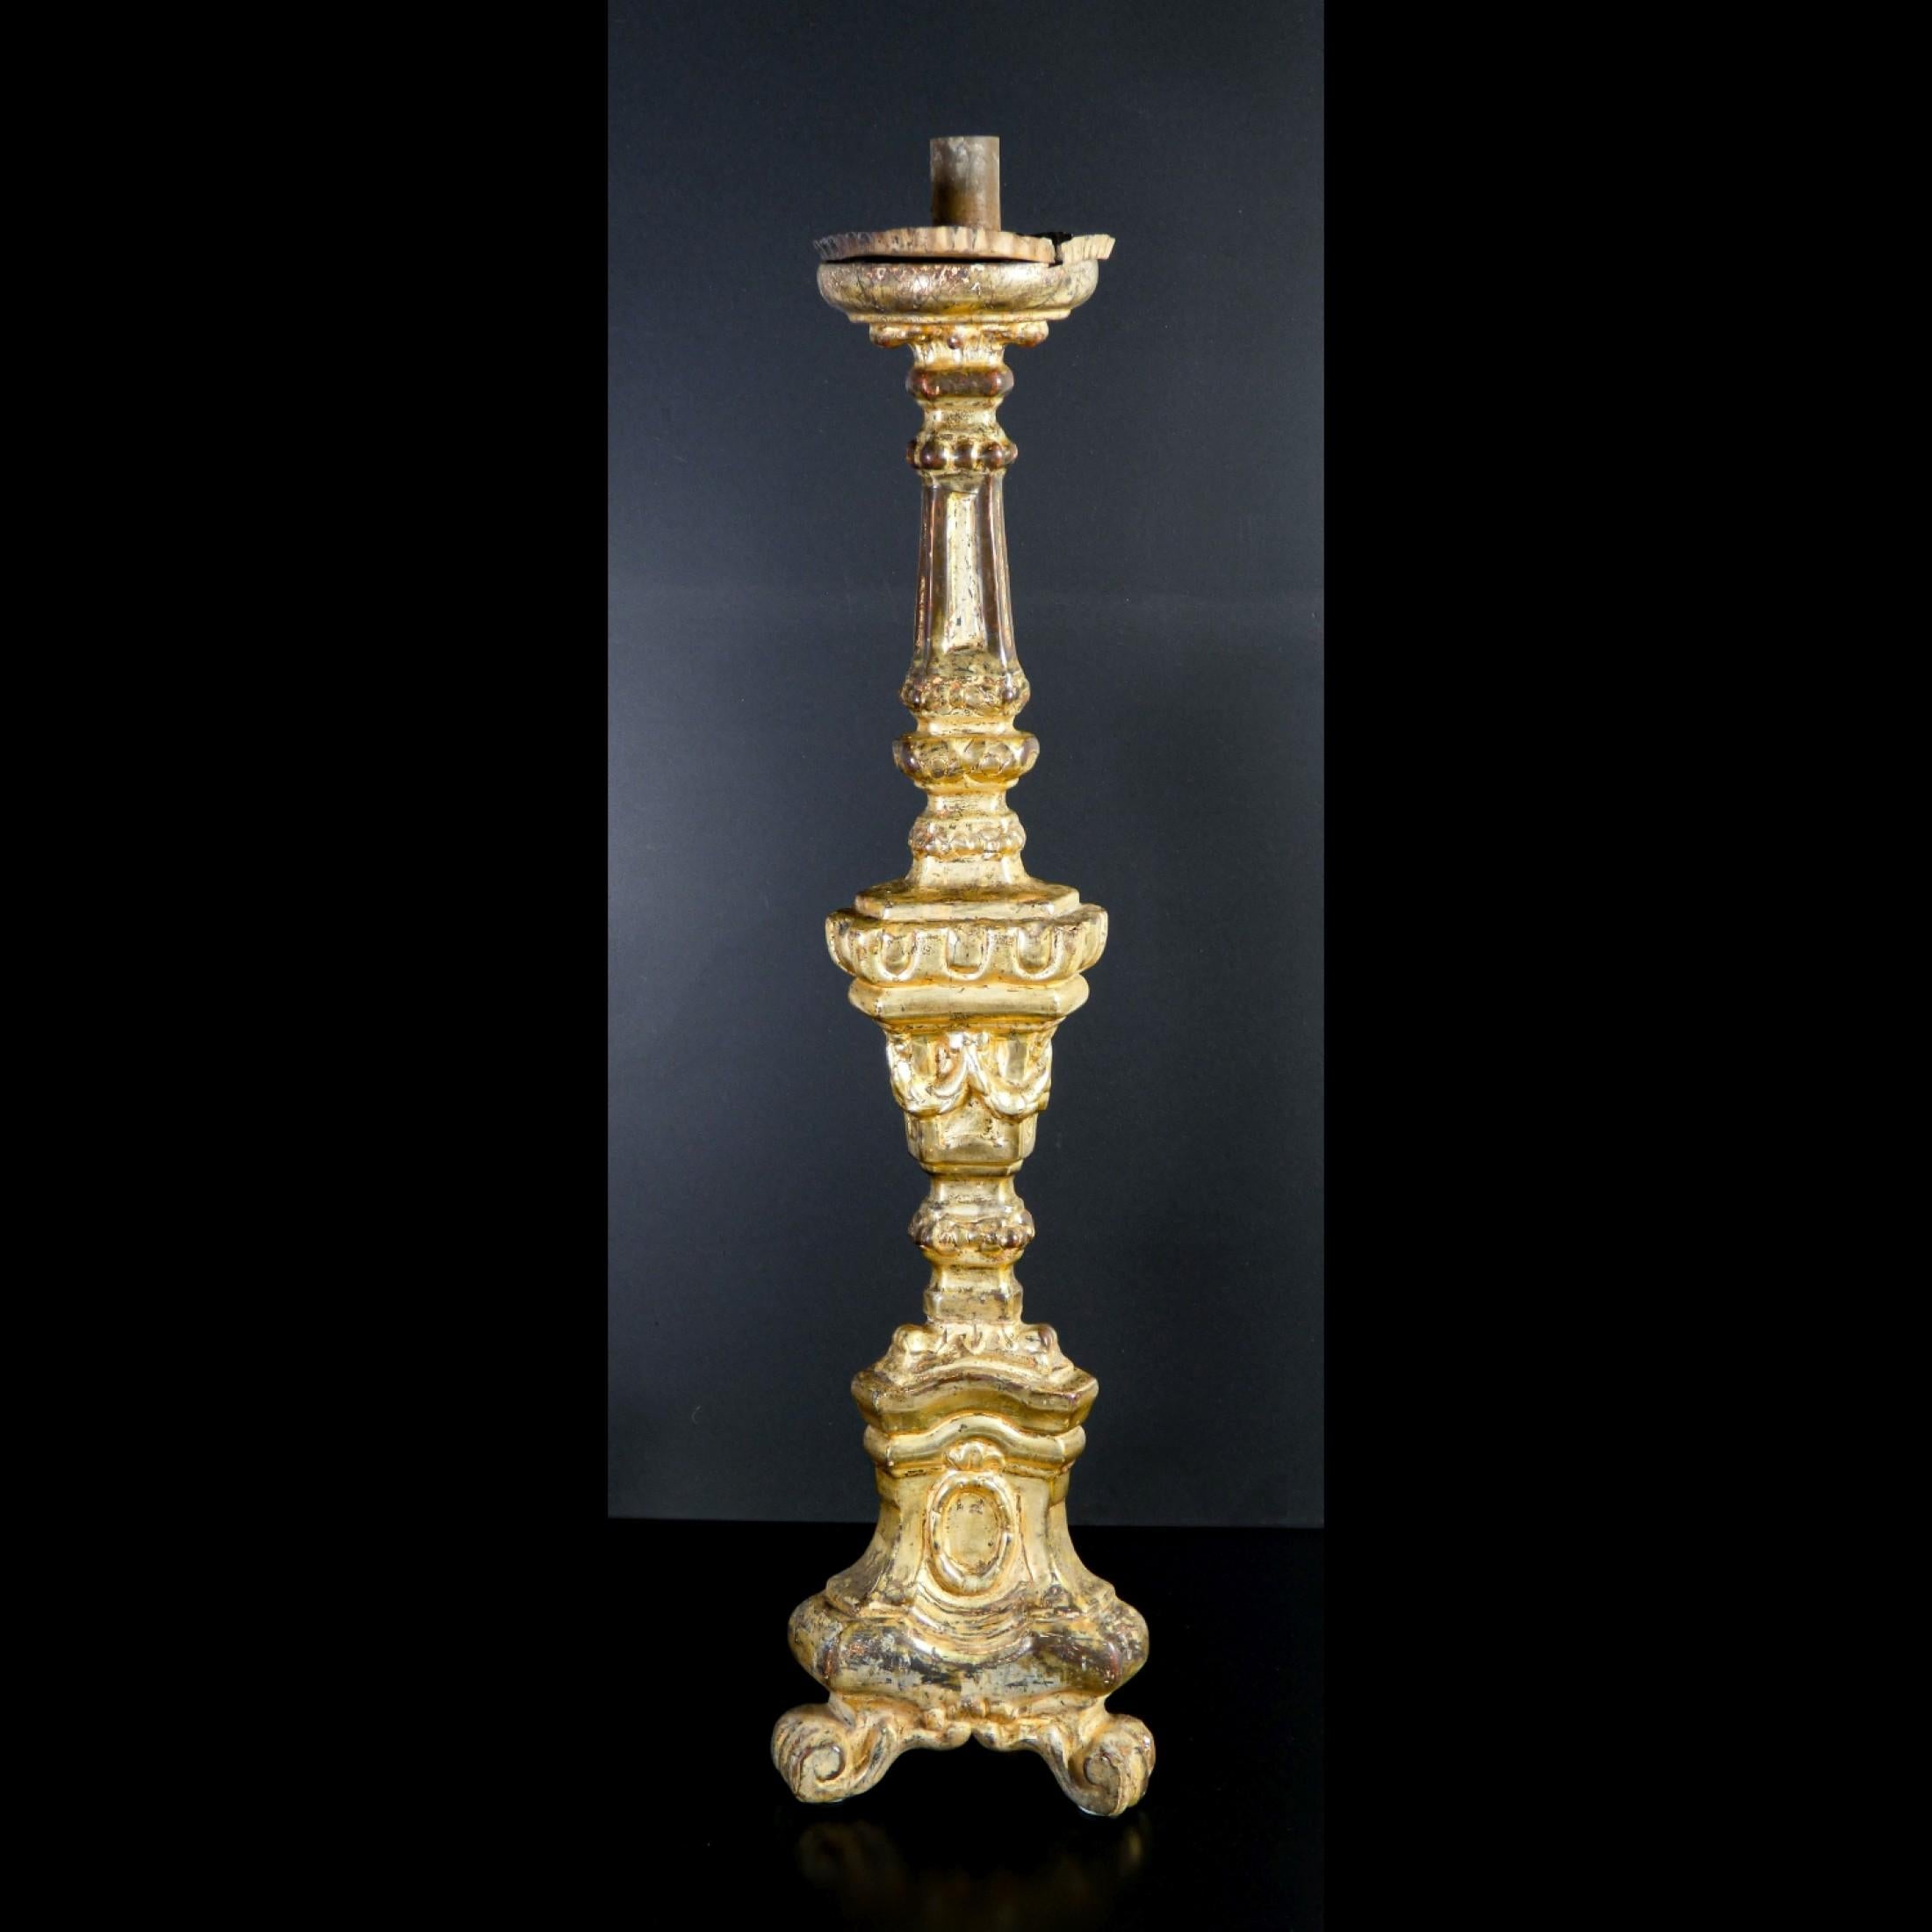 Original Louis XVI candlestick, in carved wood, 'mecca' gilded.

Origin
Italy

Period
1770-1780

Model
Side candlestick

Materials
Carved wood, 'mecca' gilding.

Dimensions
H 78 cm

Conditions
The candlestick is in very good